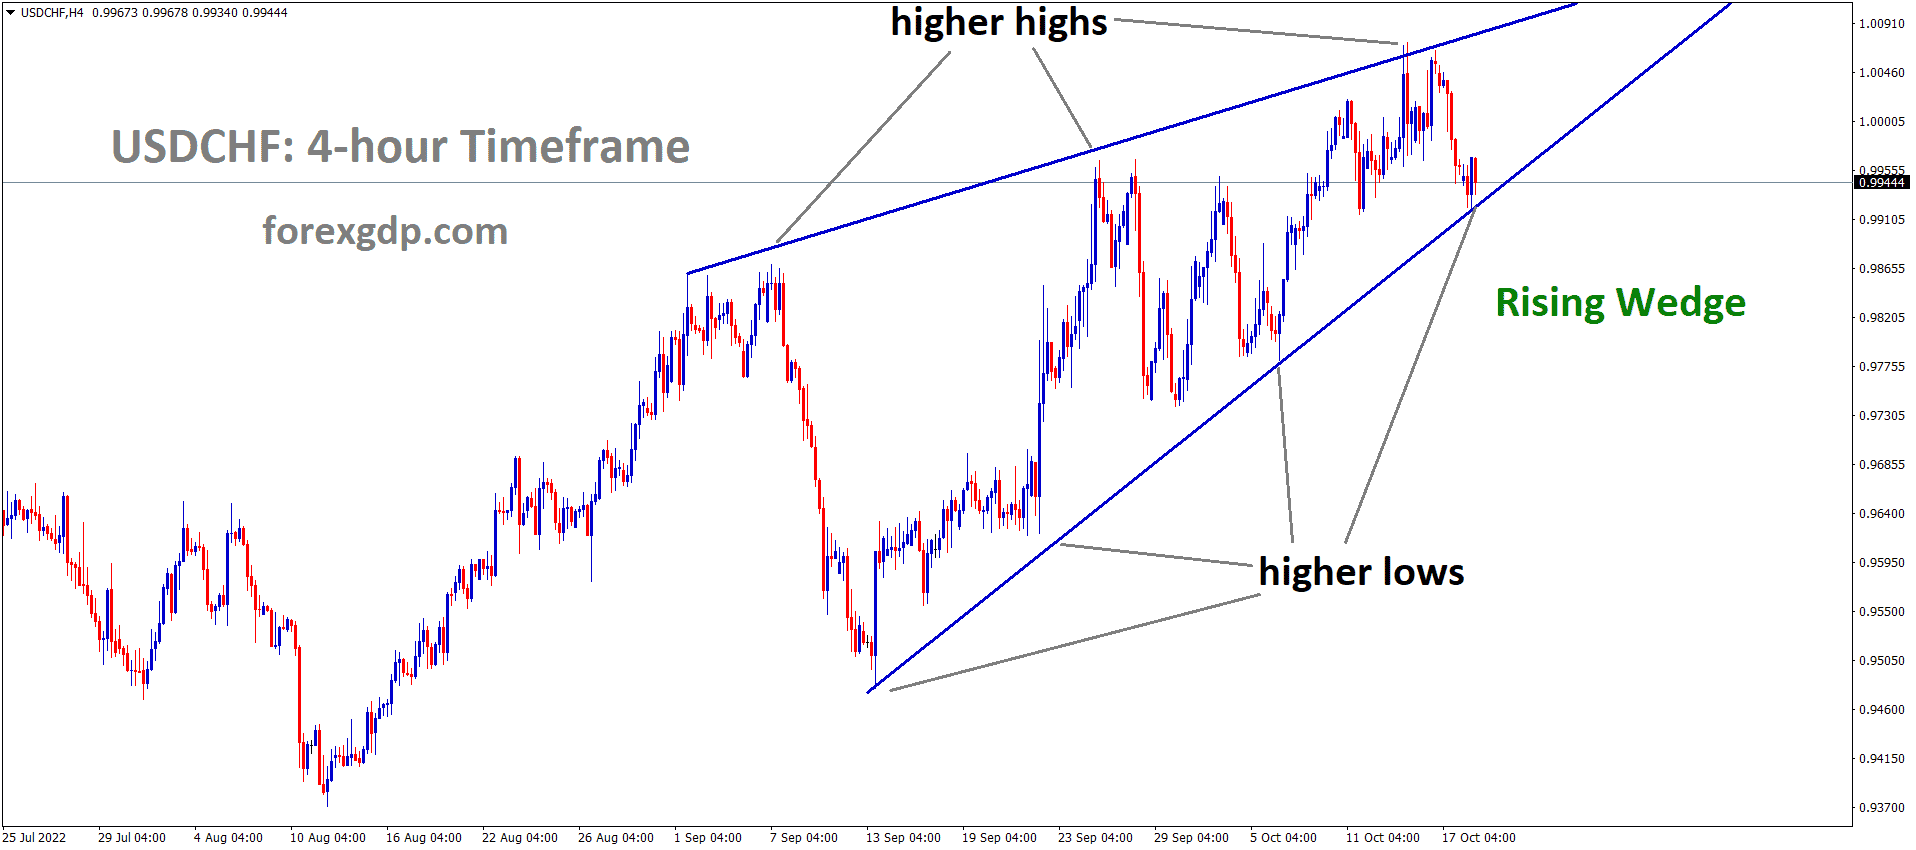 USDCHF is moving in rising wedge pattern and the market has reached the higher low area of the pattern.